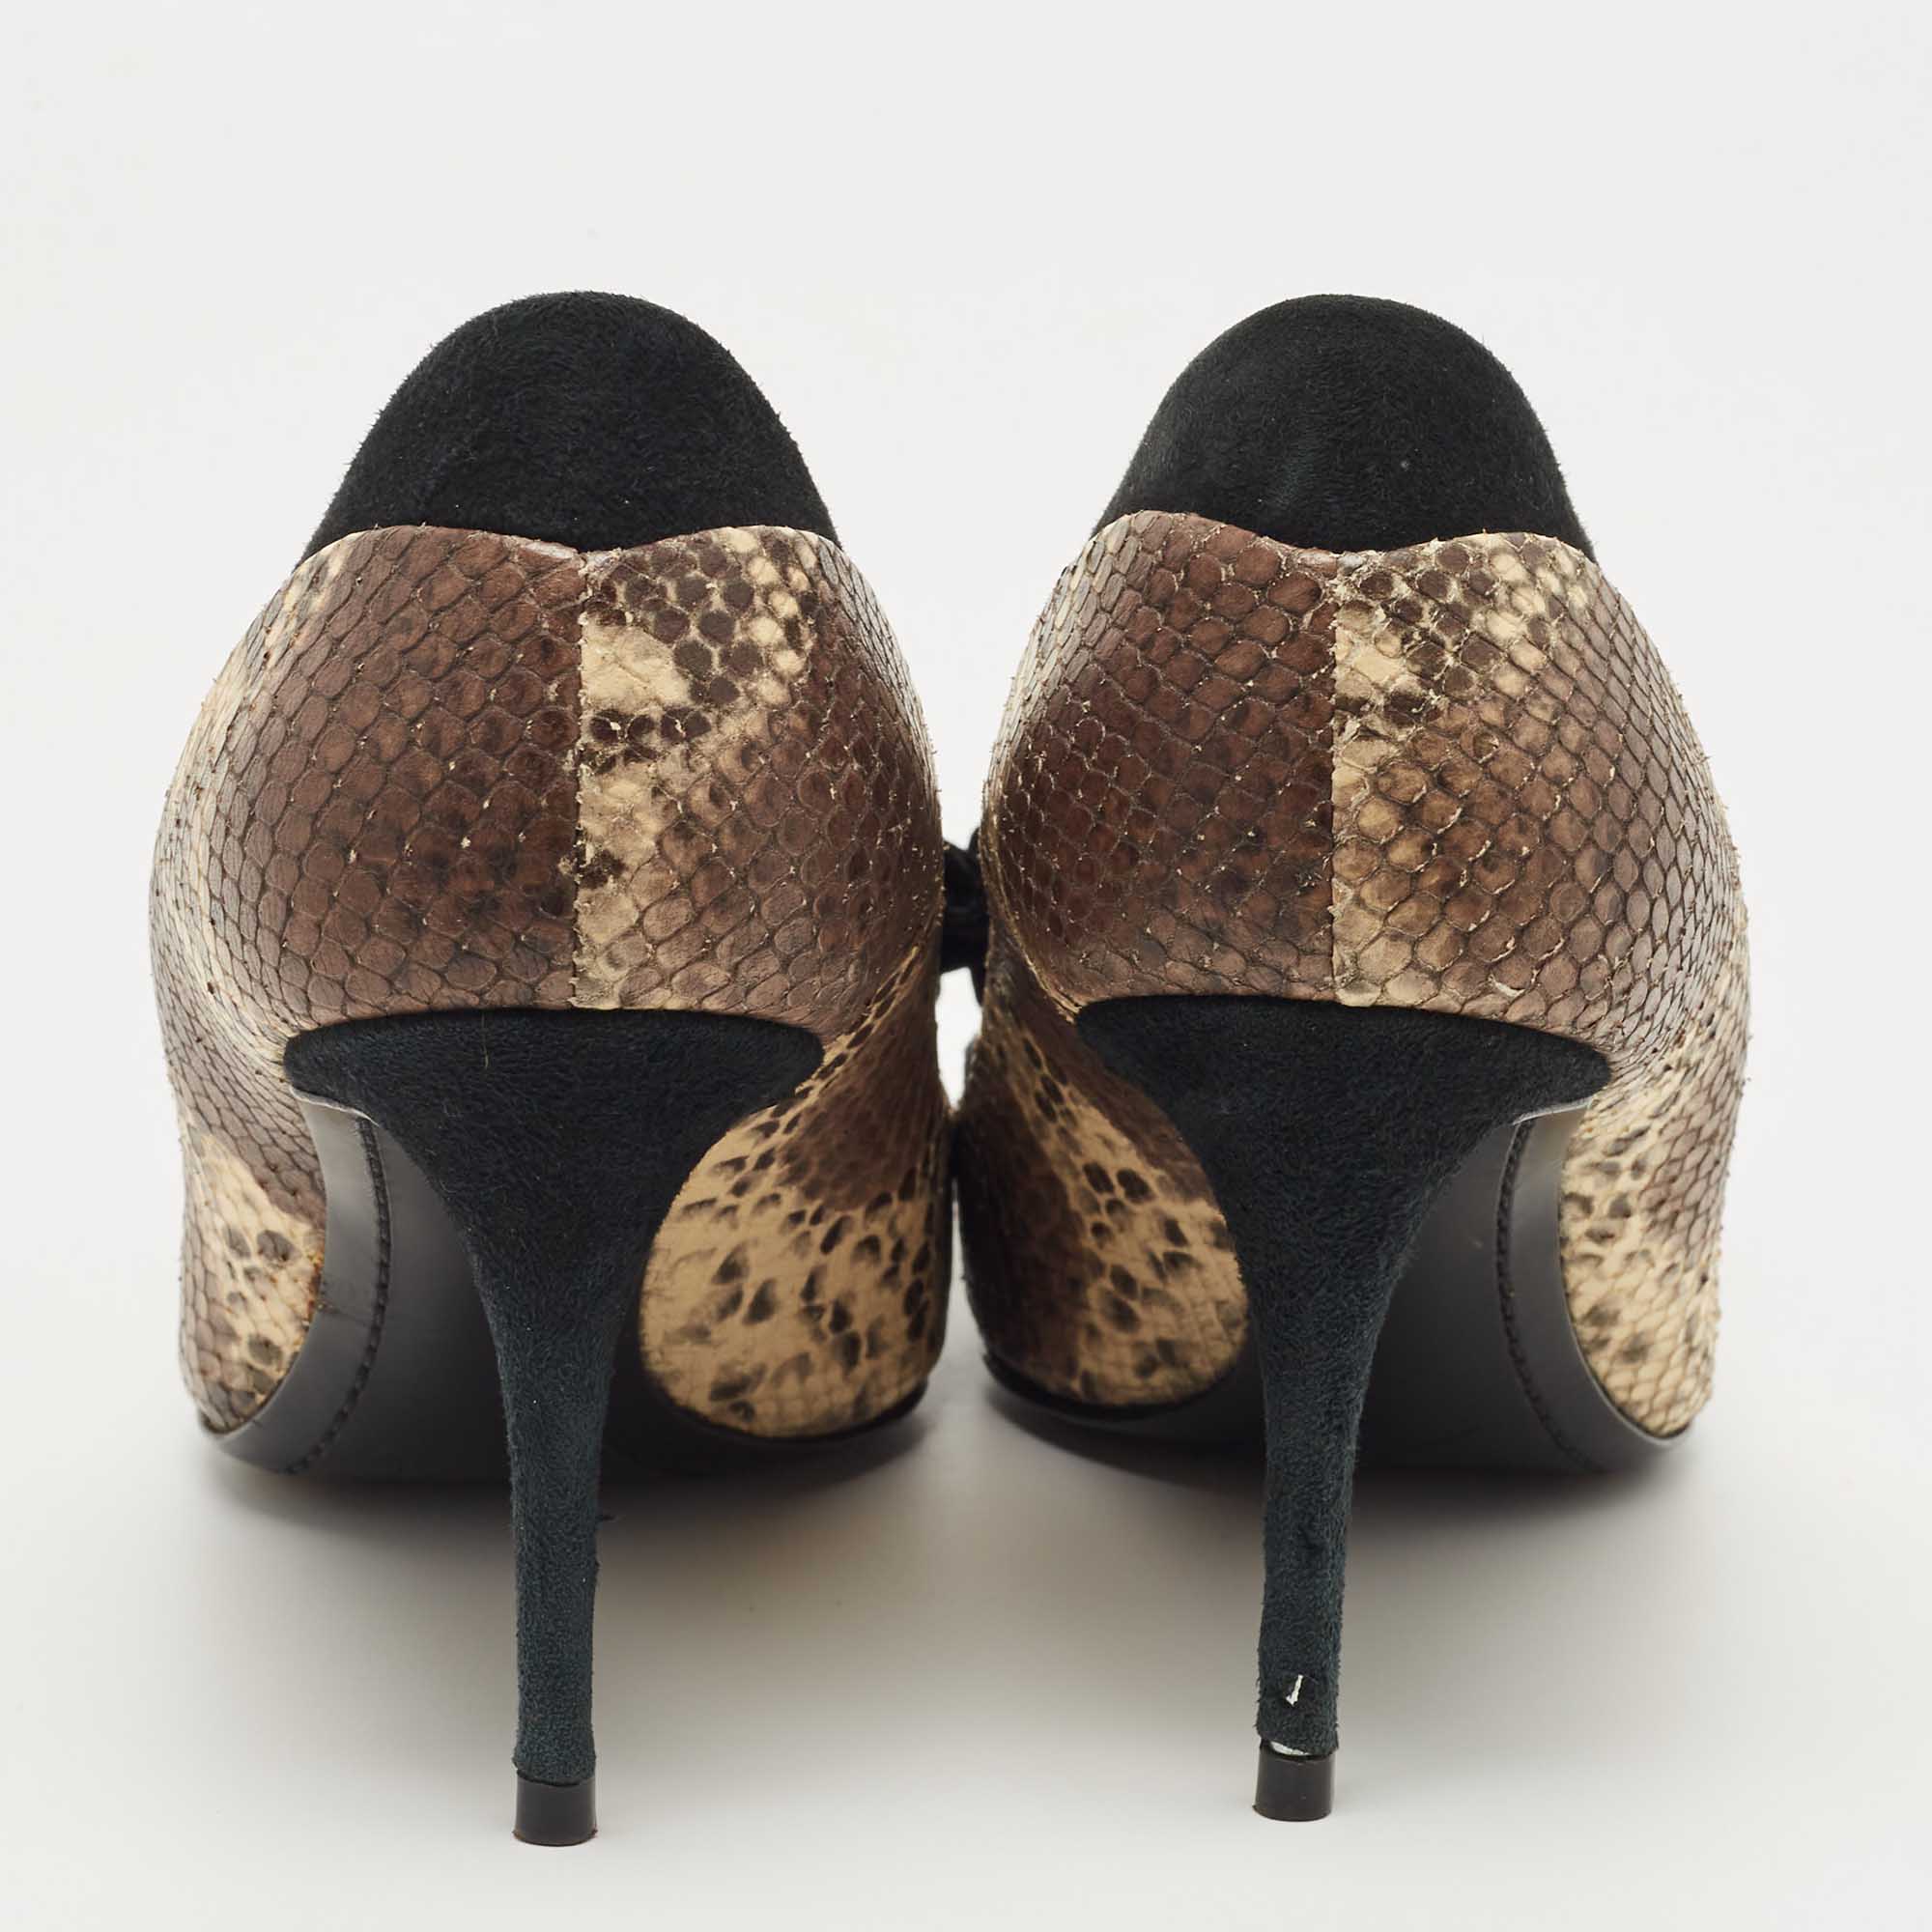 Giuseppe Zanotti Brown/Black Suede And Python Embossed Bow Pointed Toe Pumps Size 39